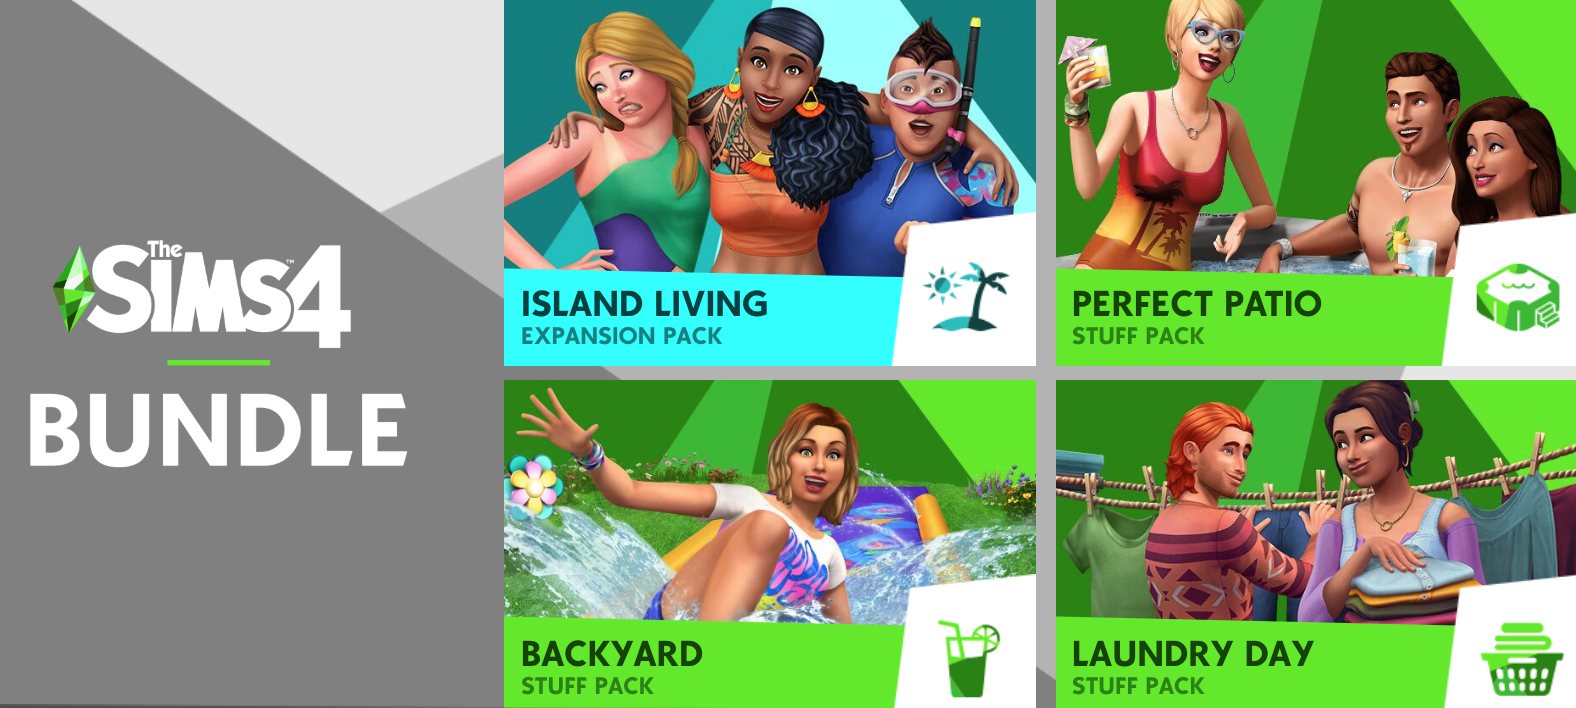 the sims 4 expansion packs